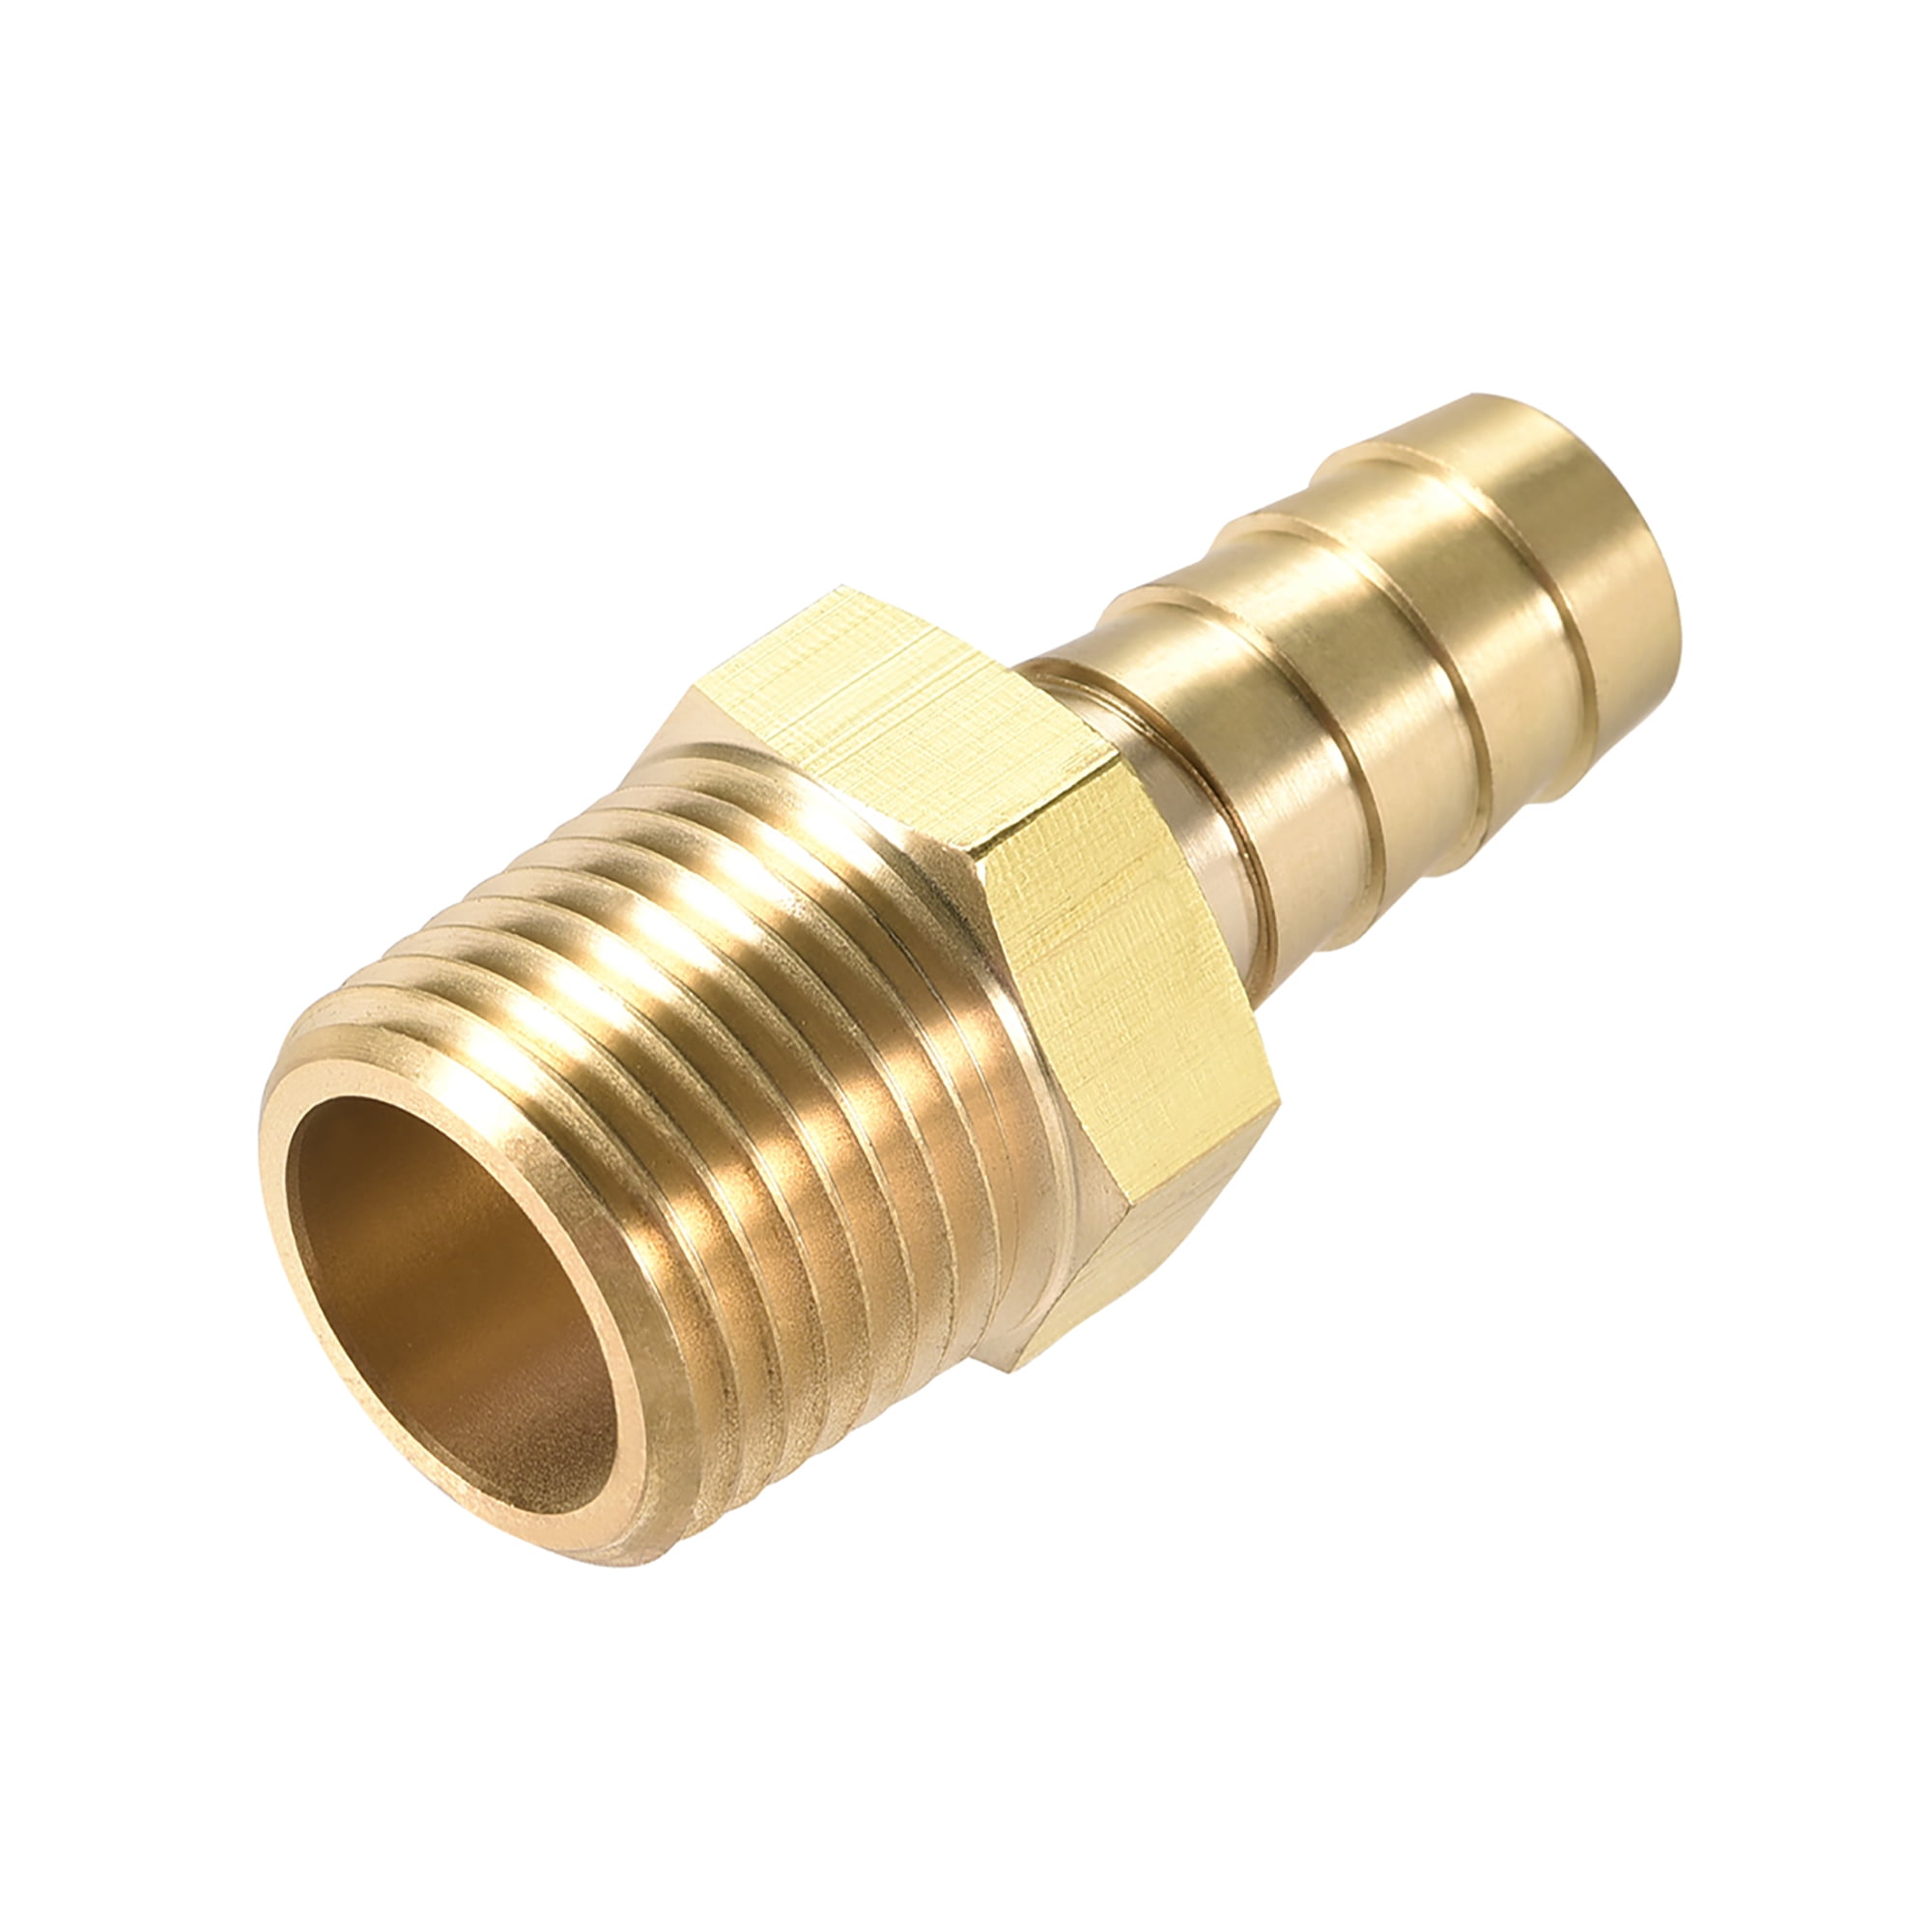 Aluminum Adapter, 1 1/2" Male NPT to 1 1/2" Male NPT Air